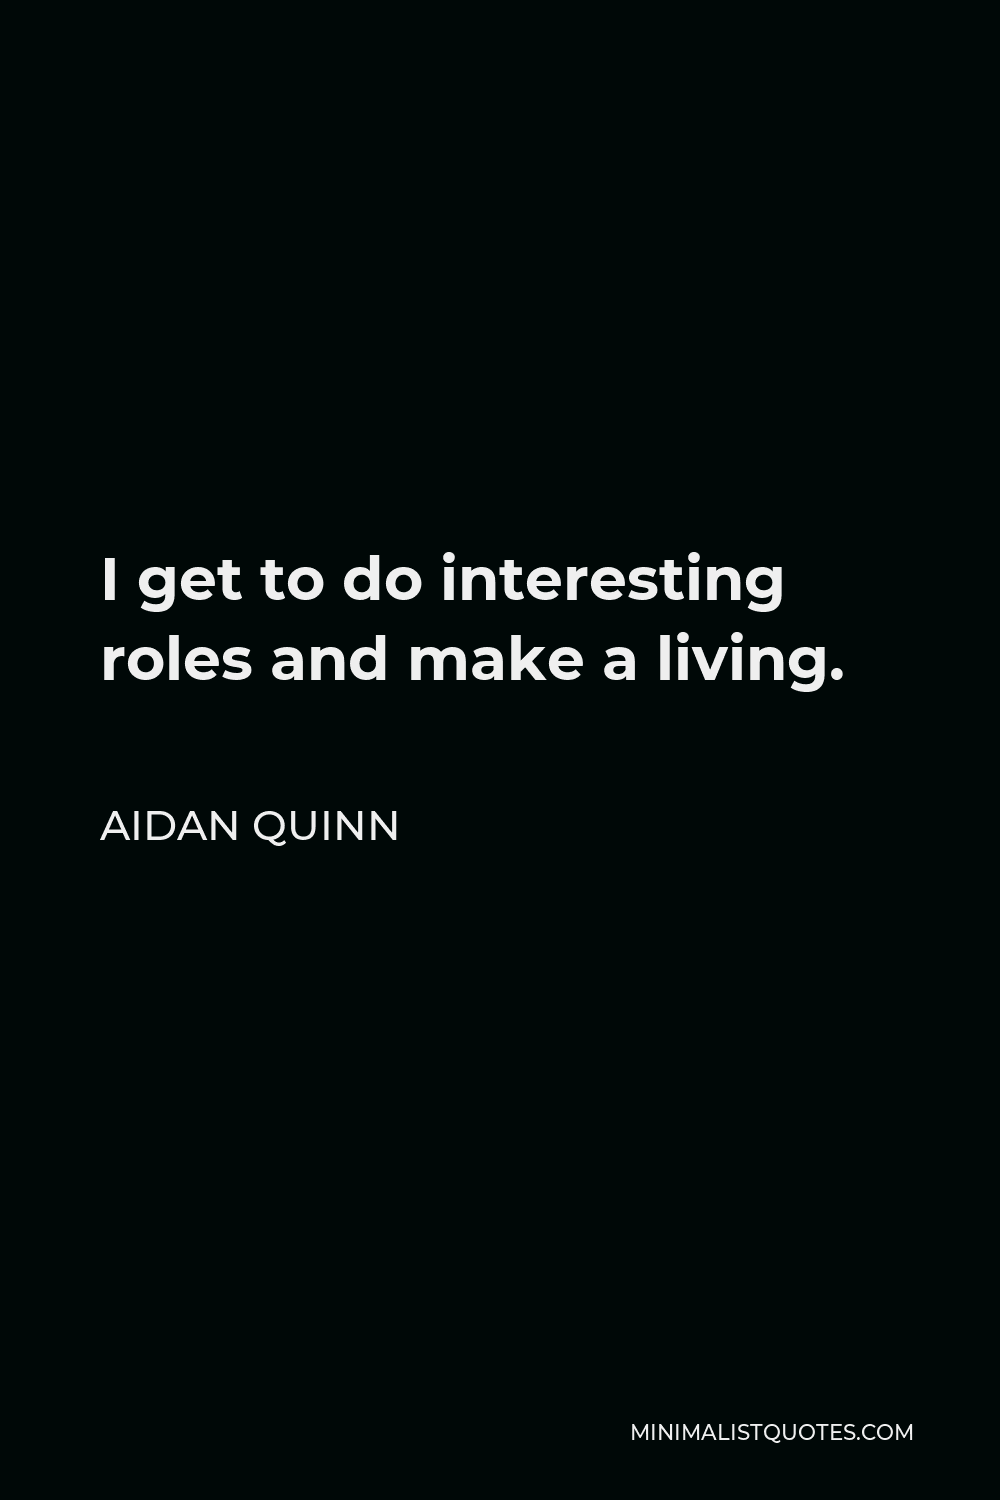 Aidan Quinn Quote - I get to do interesting roles and make a living.